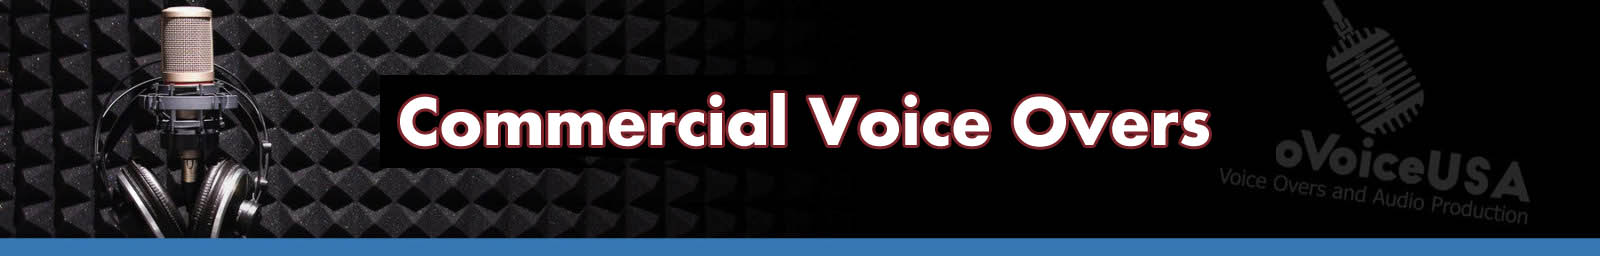 Commercial Voice Overs | American Voice Recording Service | ProVoice USA